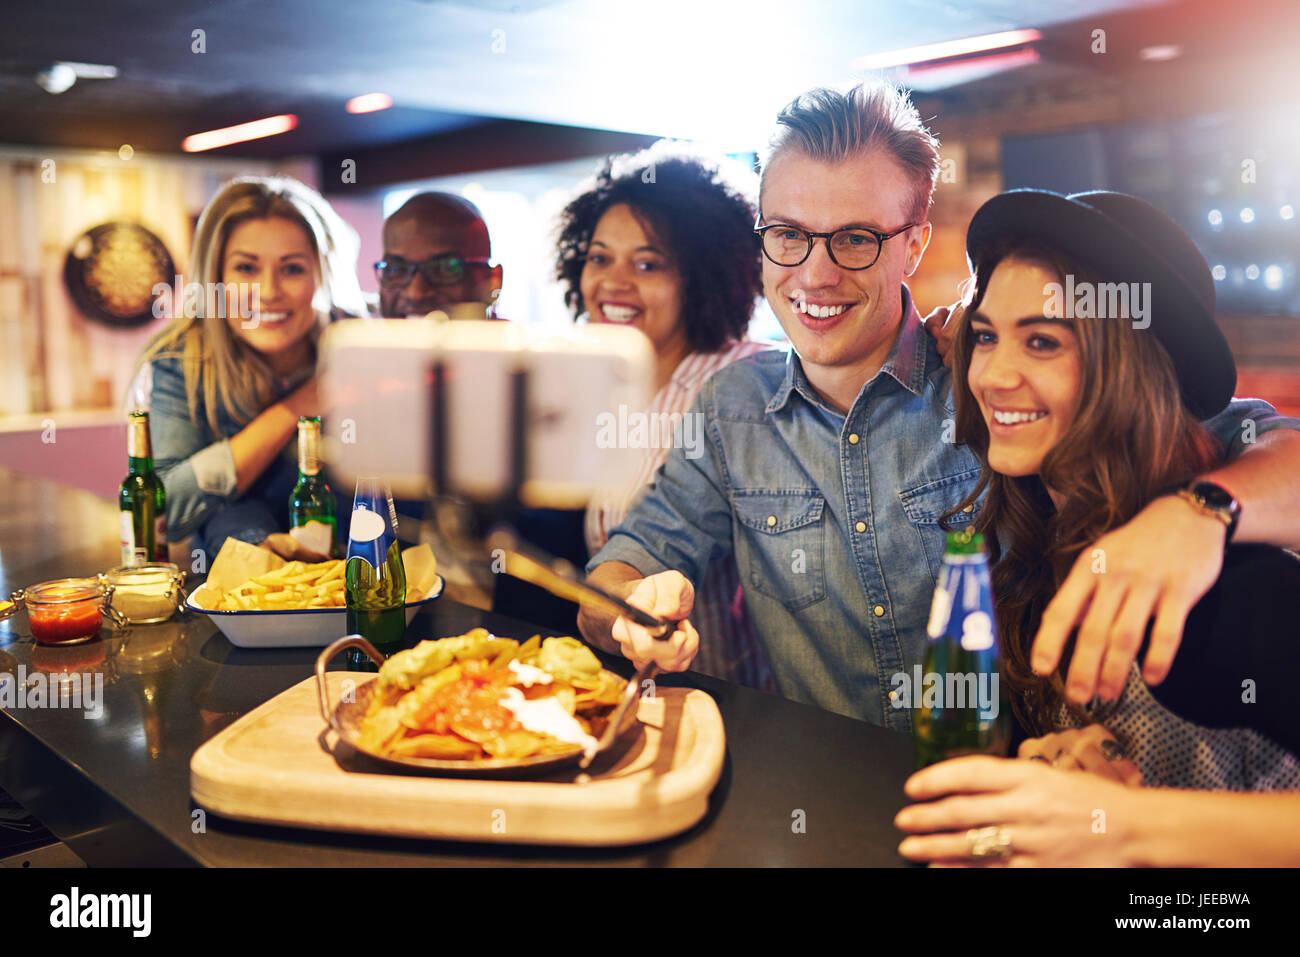 Horizontal indoors shot of people posing for the selfie with snacks and beer at the bar counter. Stock Photo